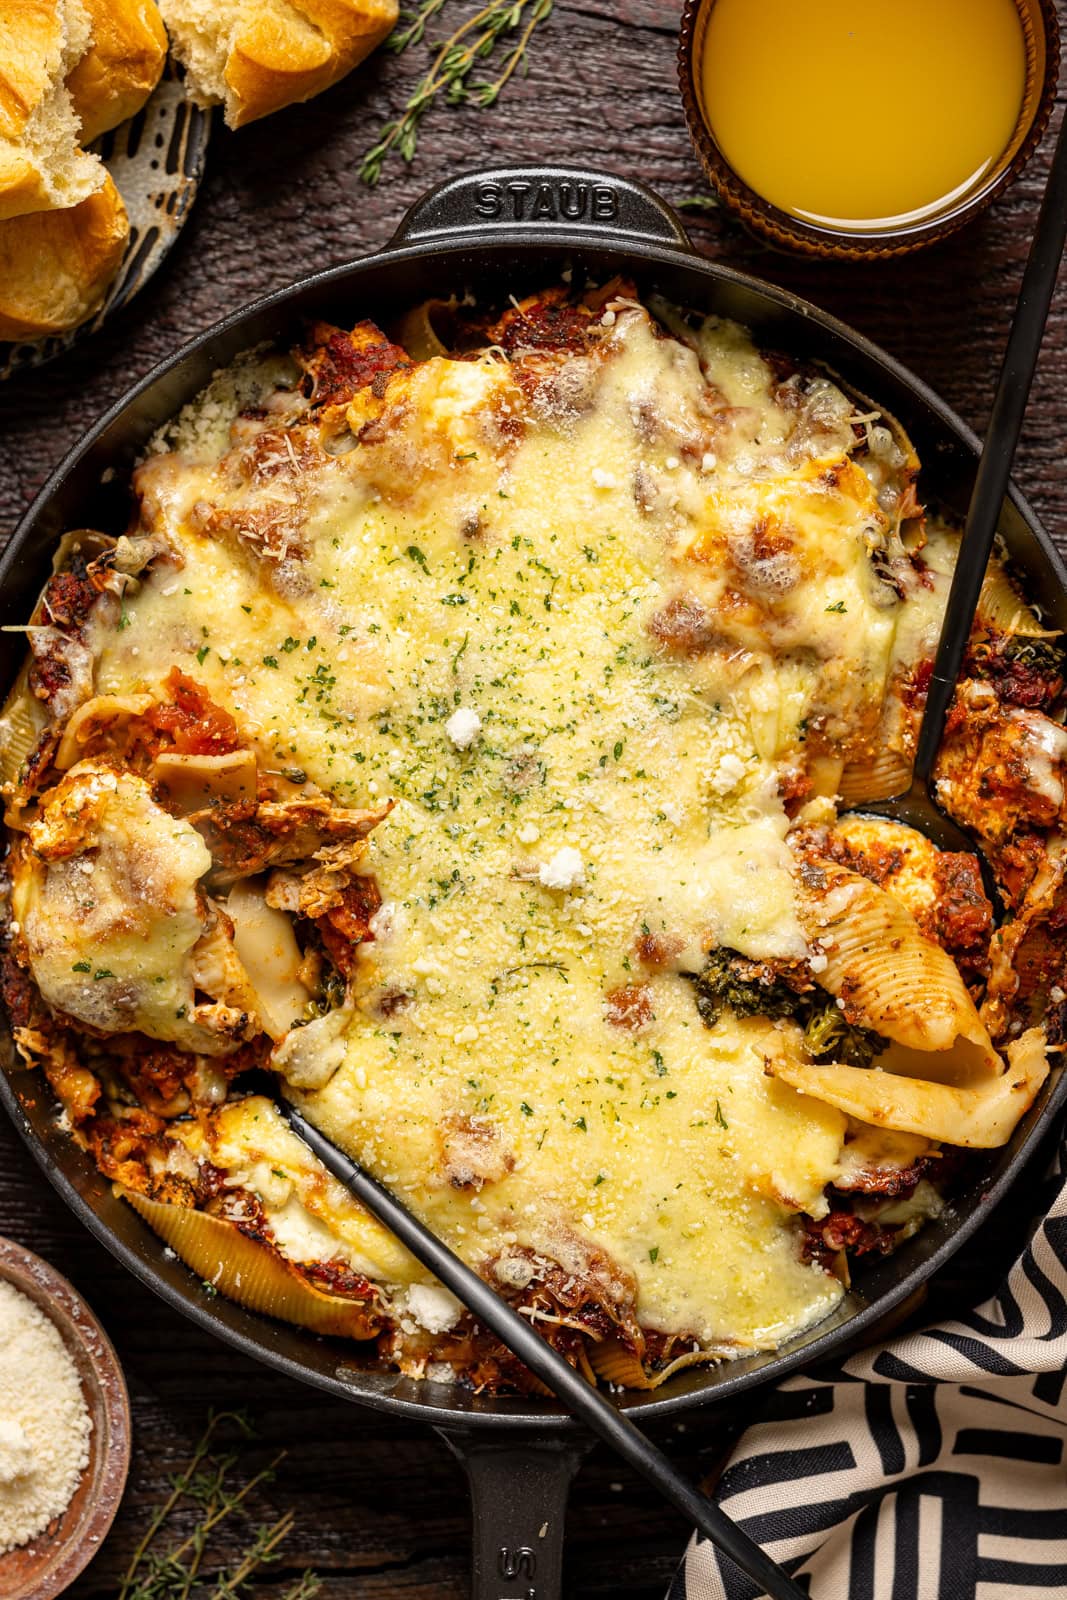 Stuffed shells scooped with two spoons in a skillet.